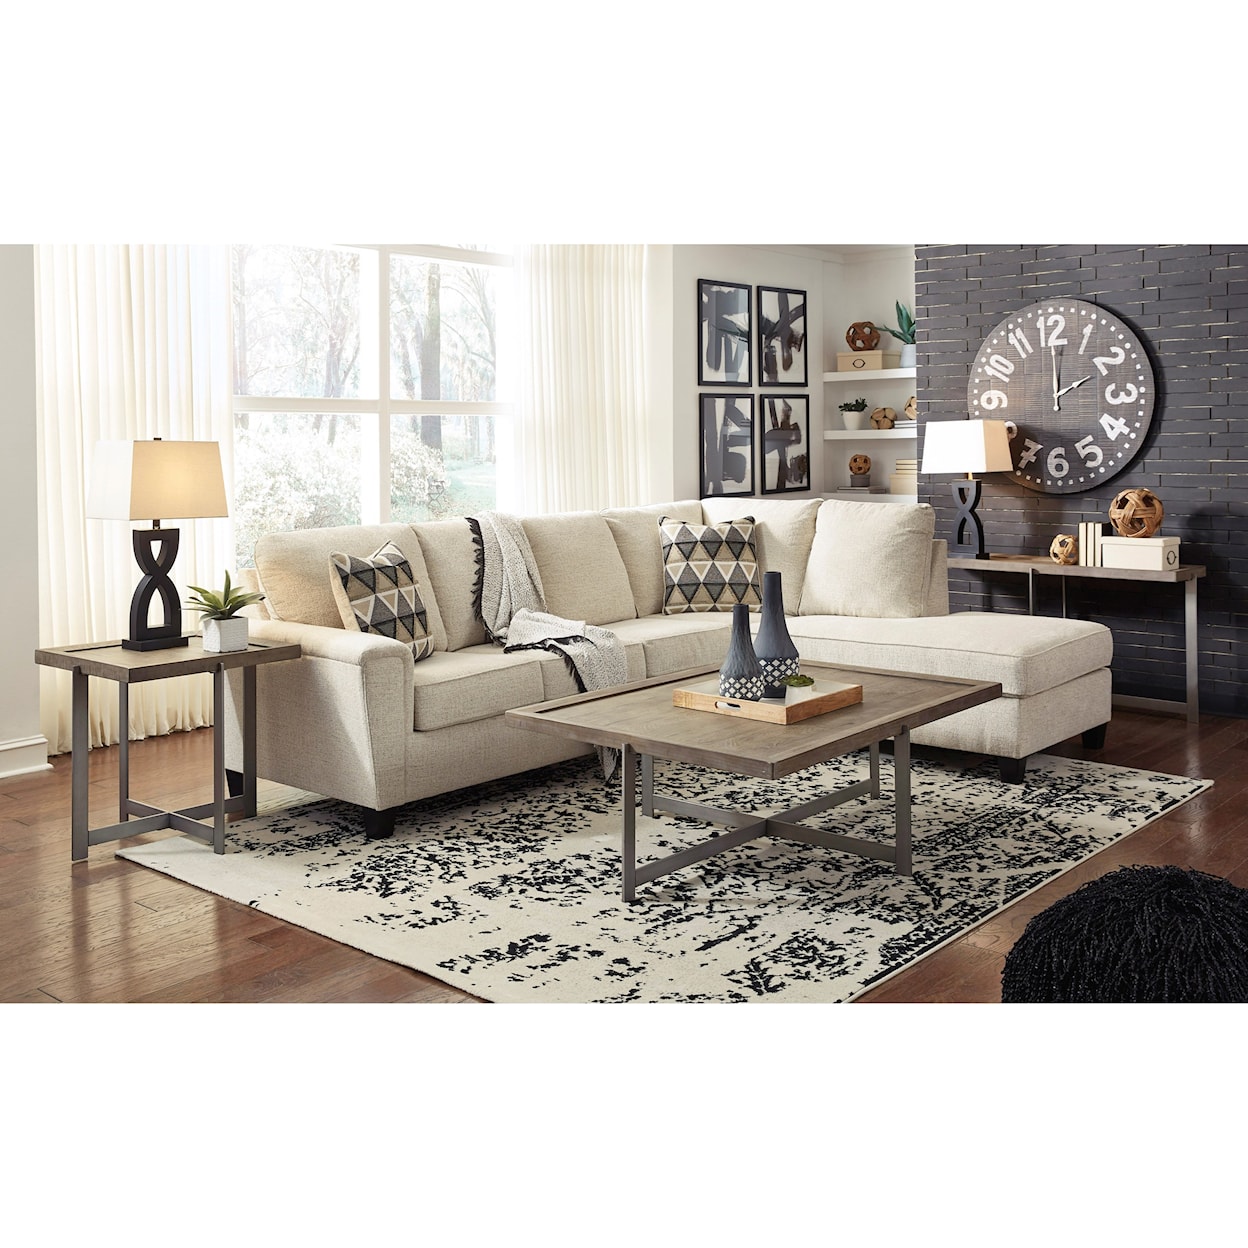 Signature Design by Ashley Abinger 2-Piece Sectional w/ Chaise and Sleeper